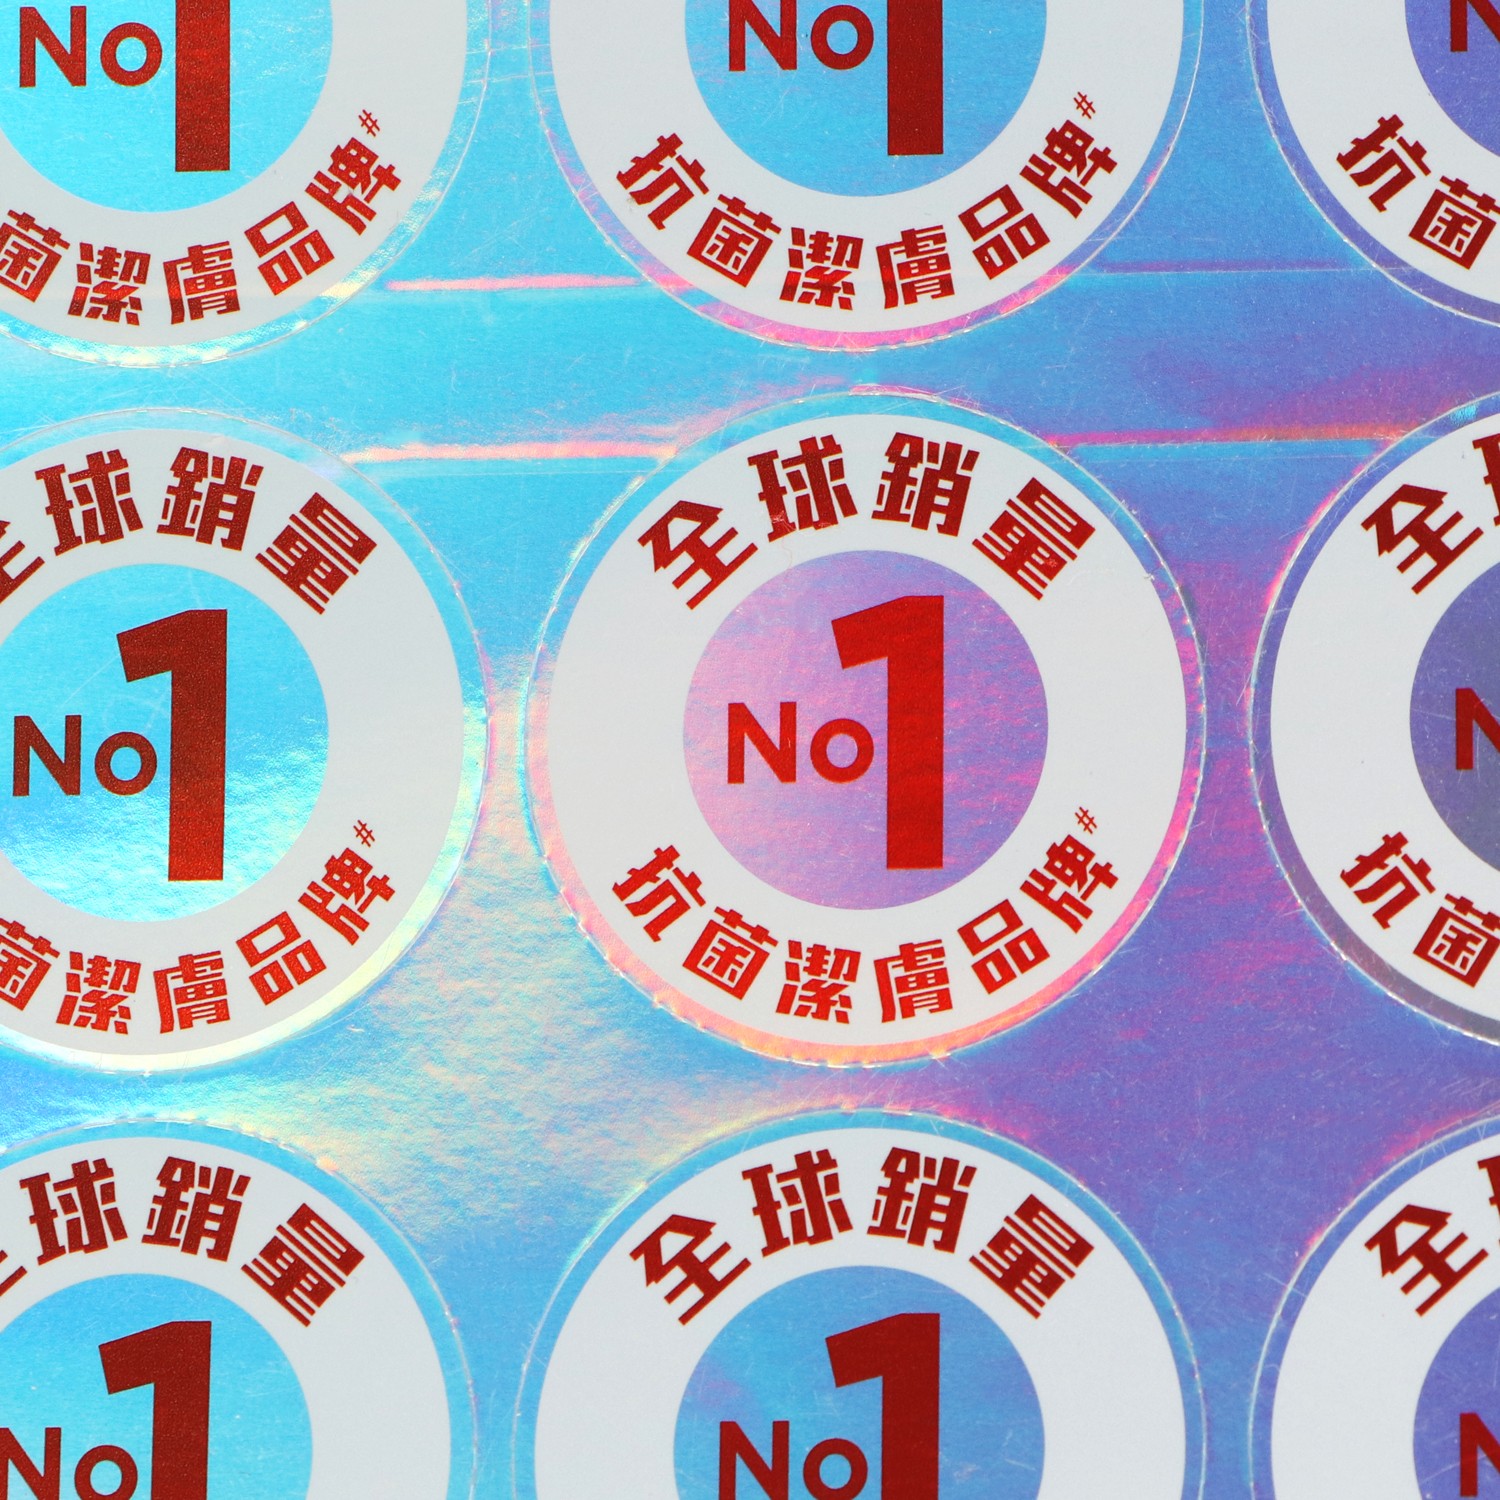 3D Holographic Hologram Stickers and Label